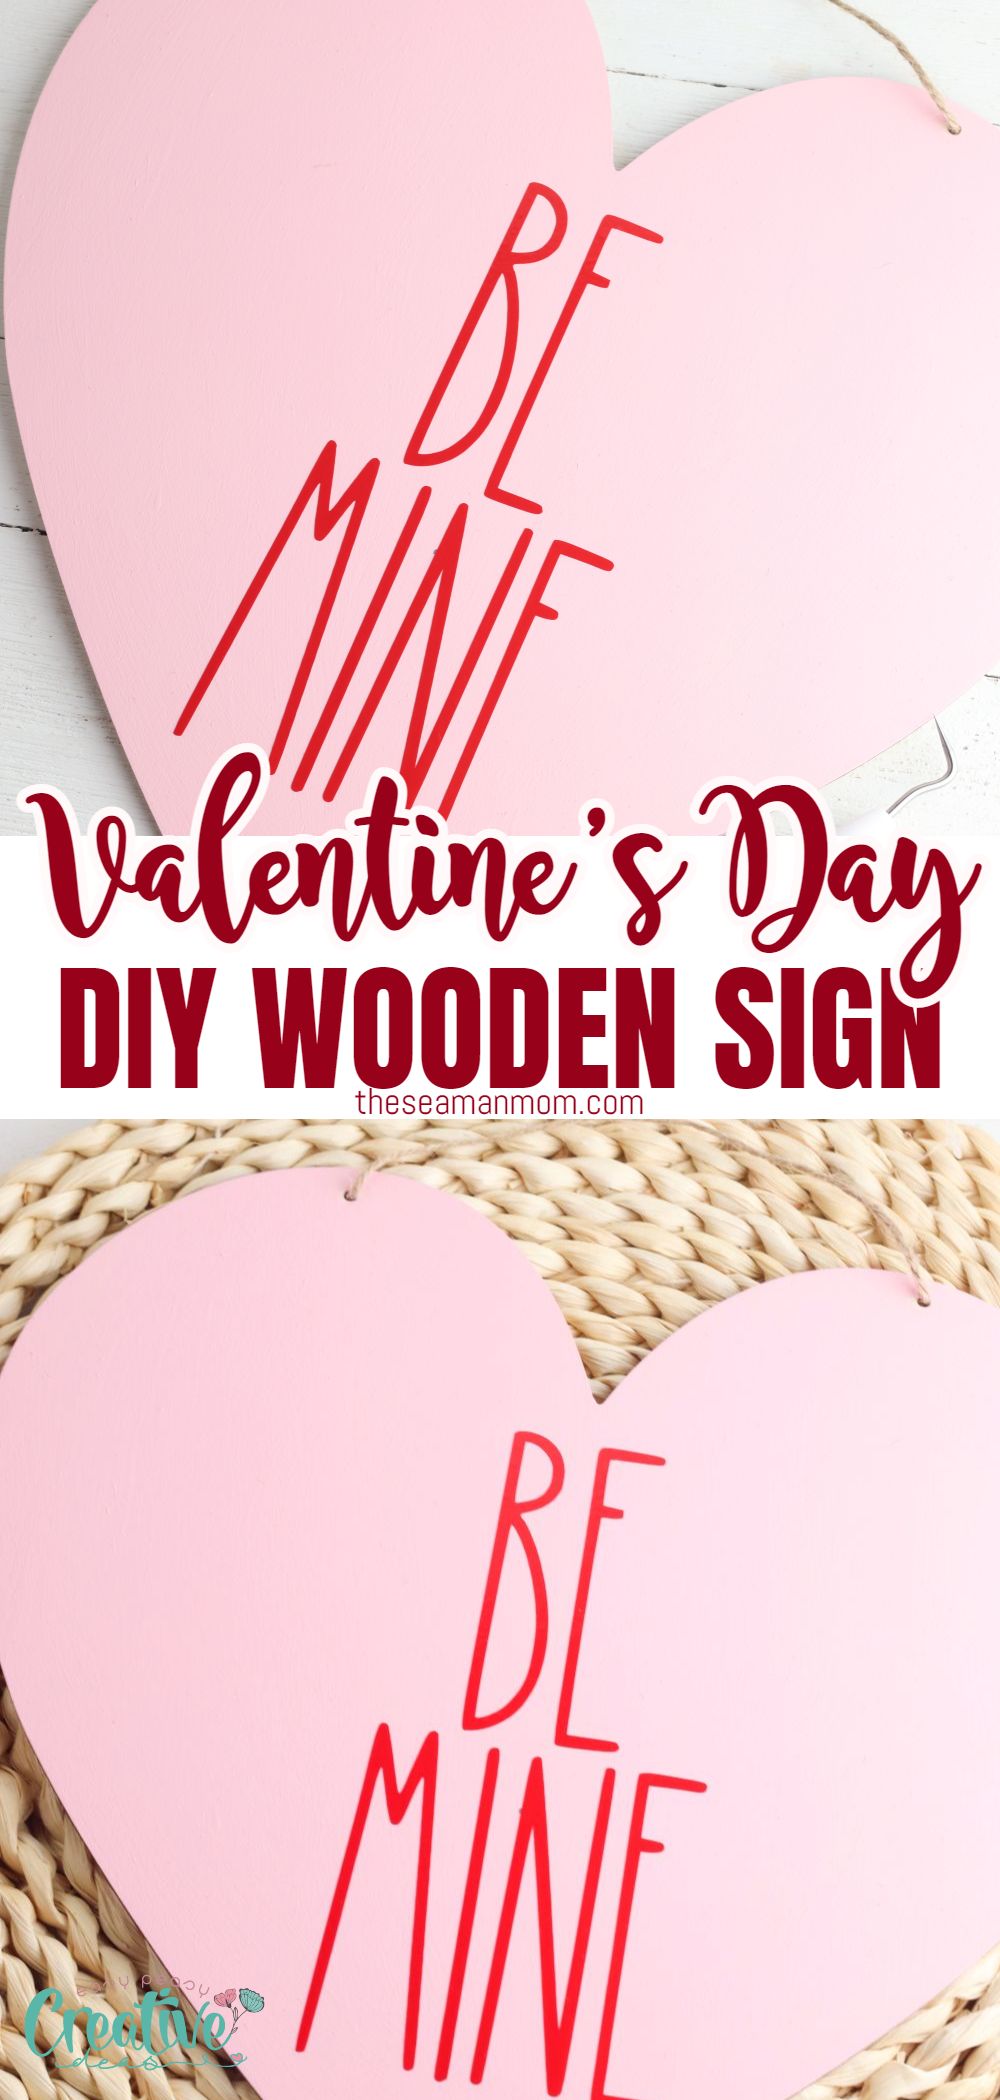 Crafts are a great way to express your creativity and show affection to a loved one on Valentine's Day. Here is an easy tutorial for a cute, Rae Dunn inspired wood Valentine’s Day sign you can make this year! via @petroneagu